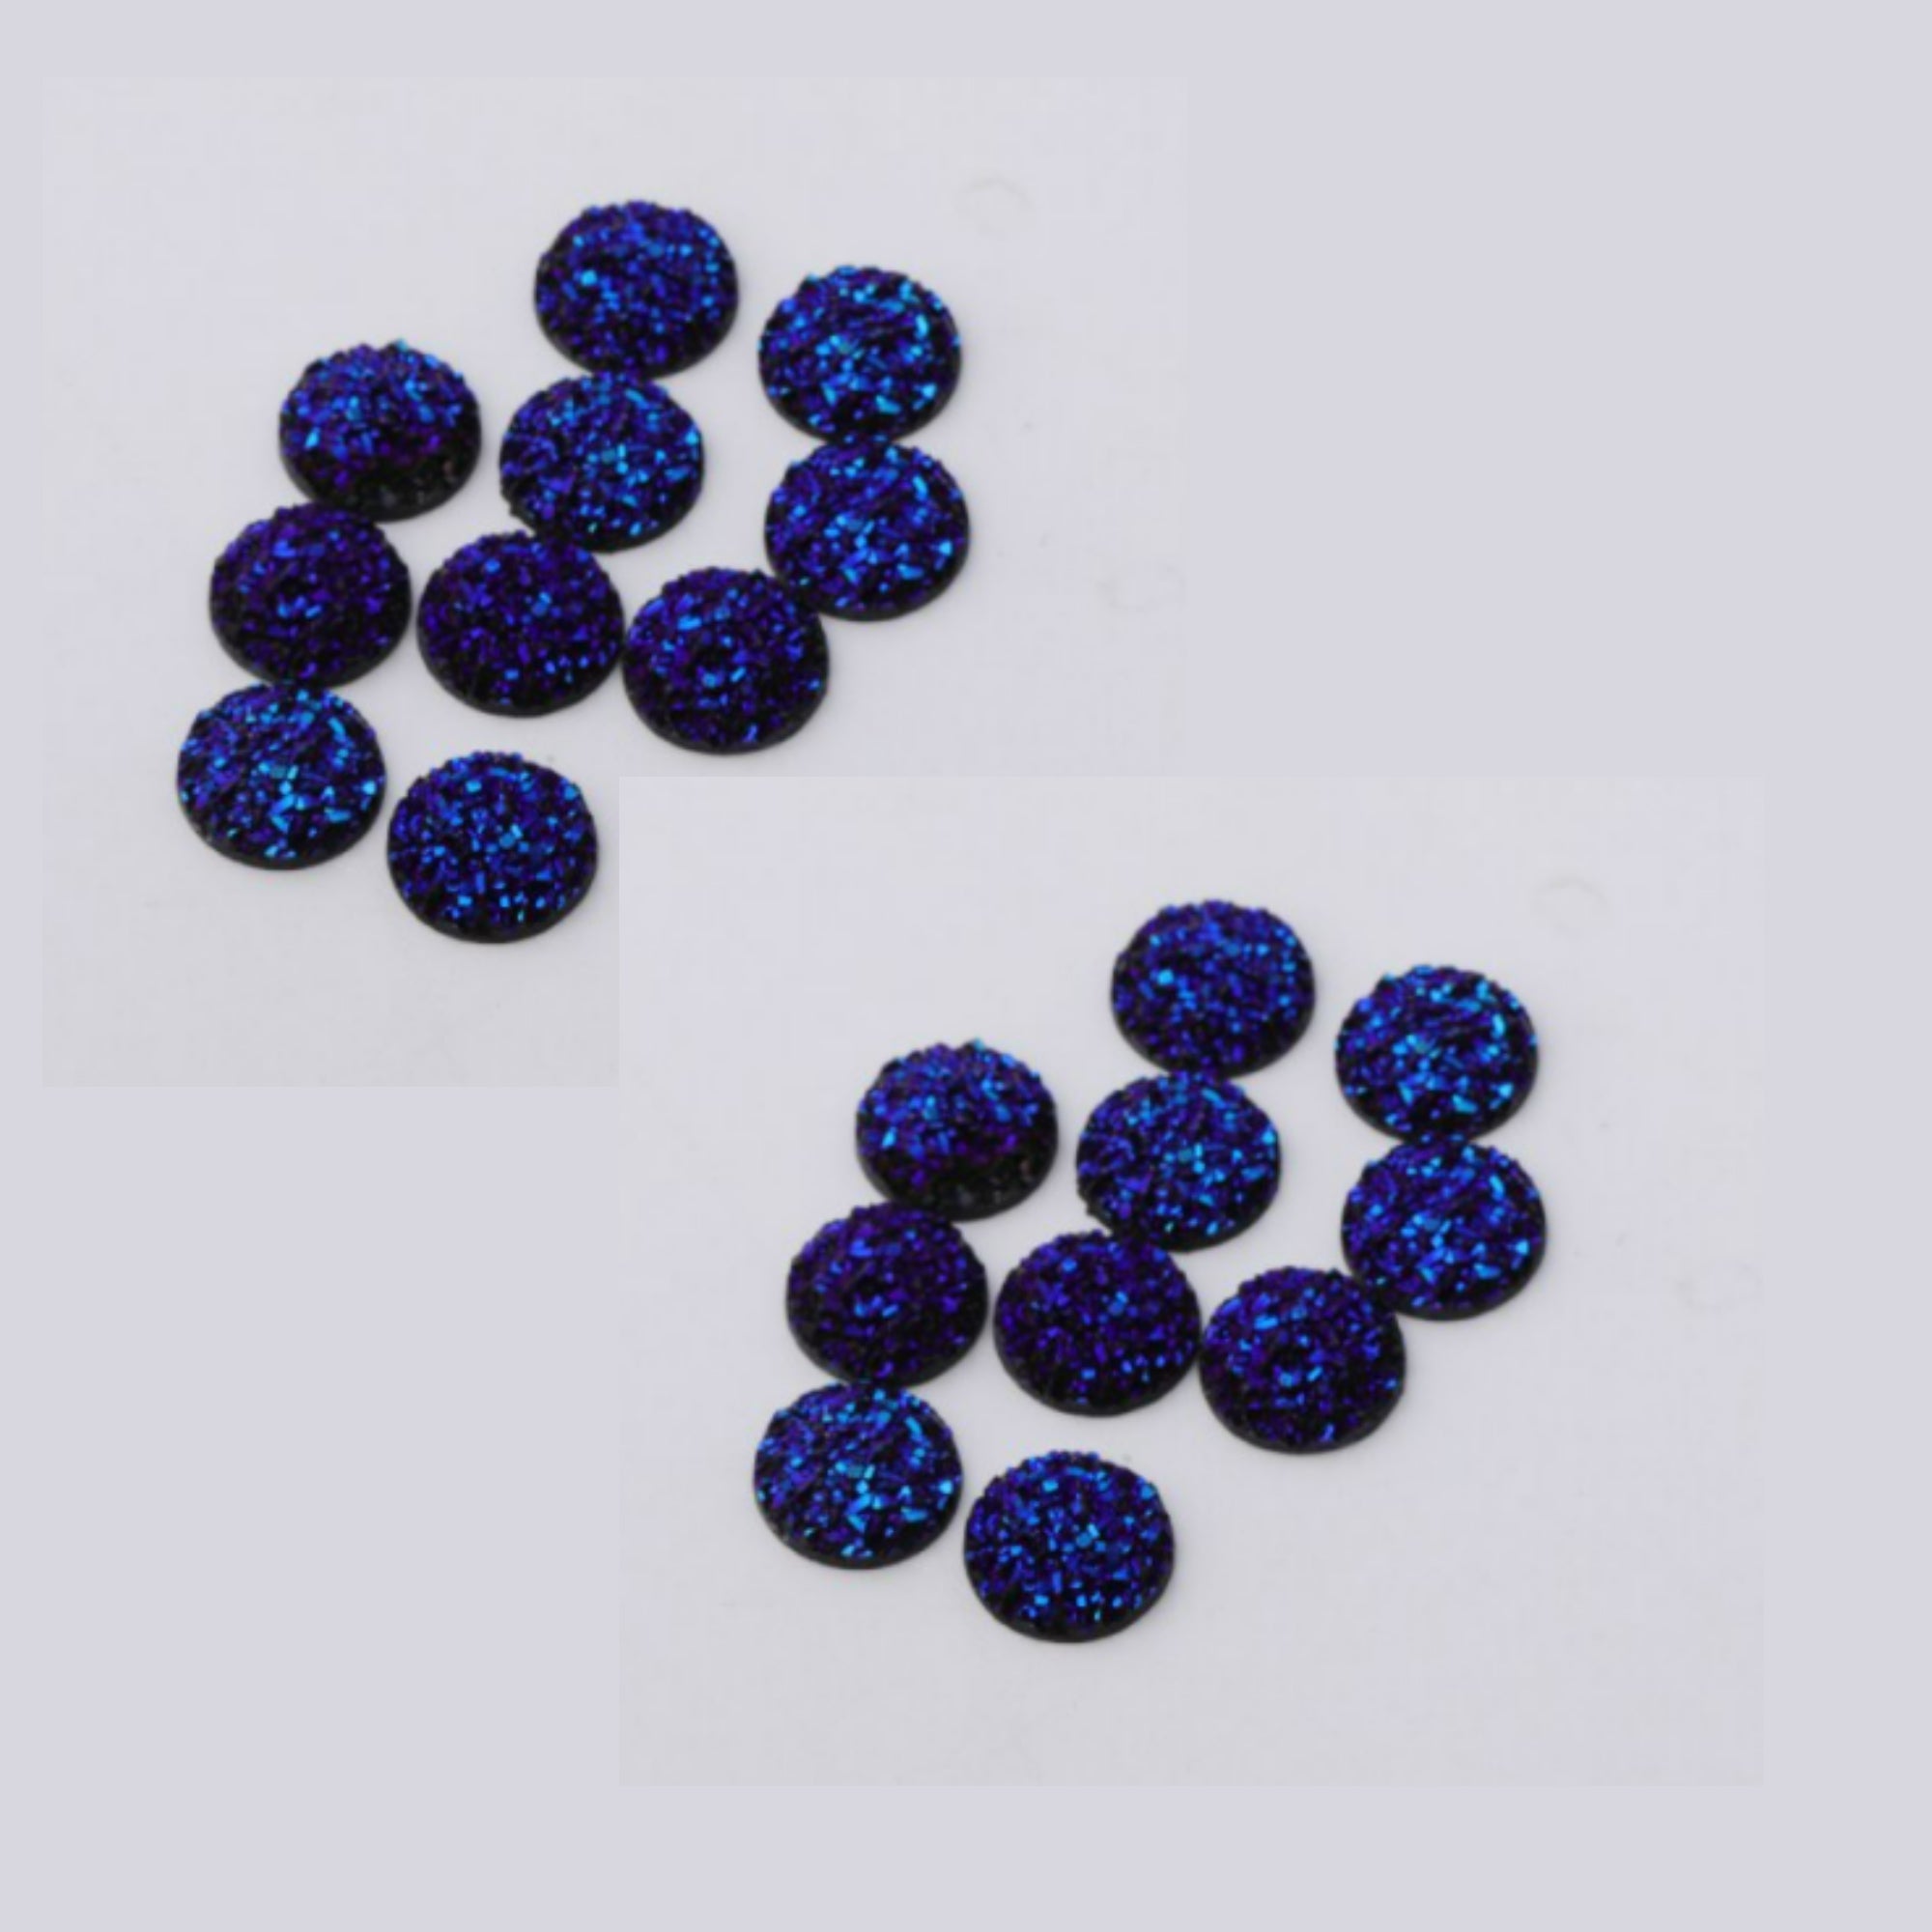 Bling It Up Collection 3/8" Cobalt Blue Chunky Round Bling - Pkg. of 20